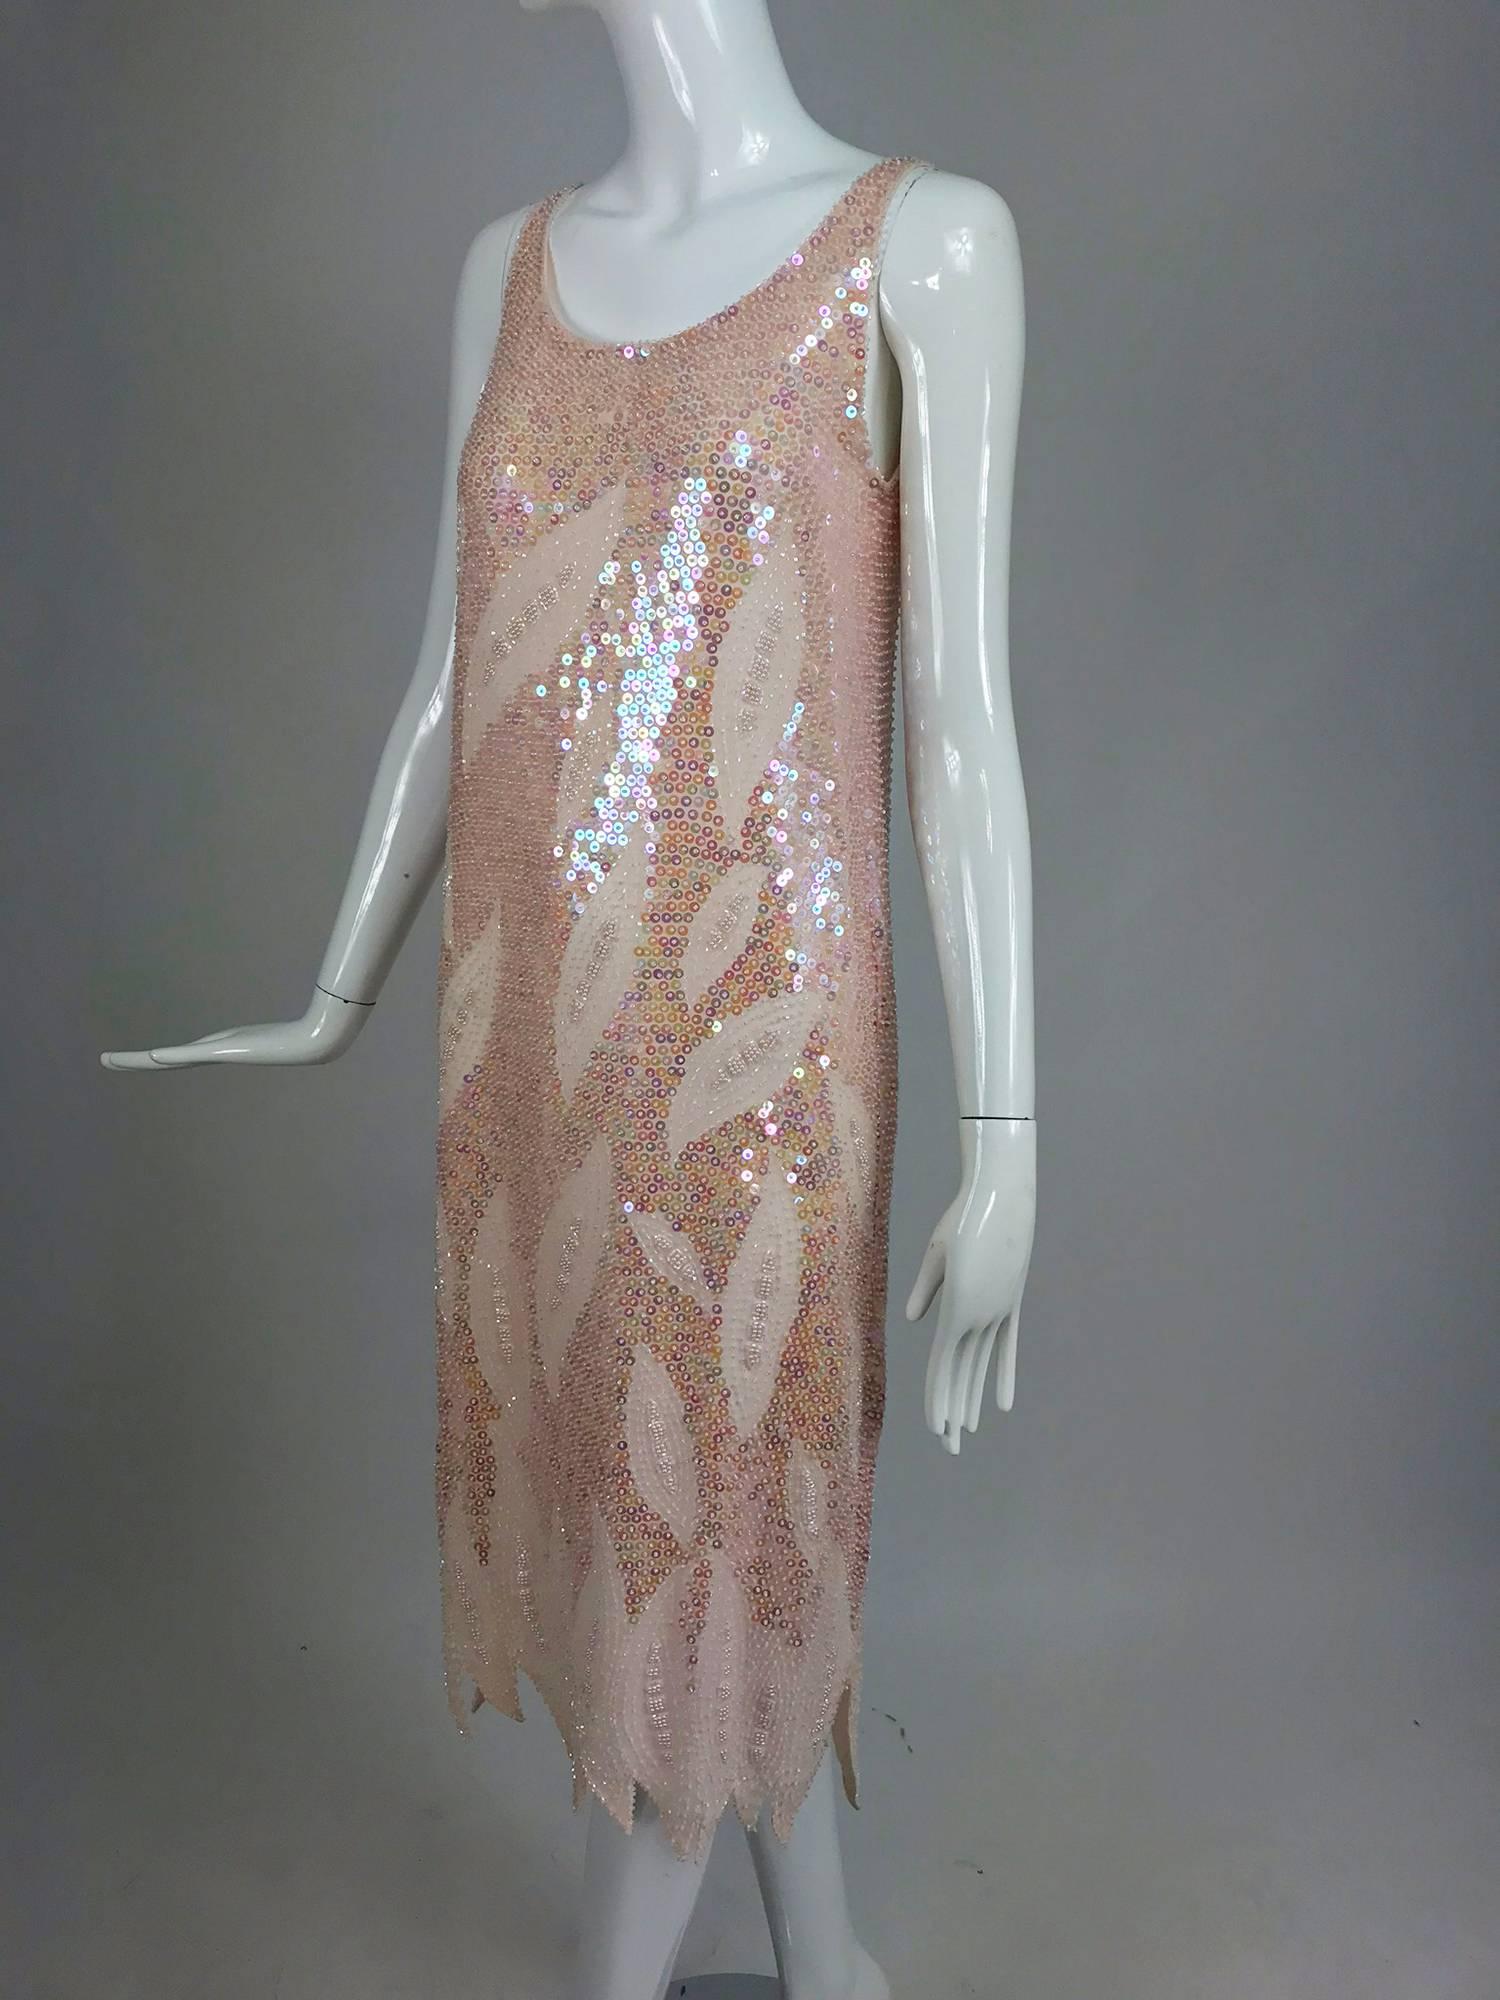 Pink Sequin and beaded flame hem dress from the 1980s...Pale pink with iridescent sequins, scoop neck line, sleeveless dress in silk...Irregular hemline looks like flames...Fully lined in pink silk...Fits a size small.

In excellent wearable